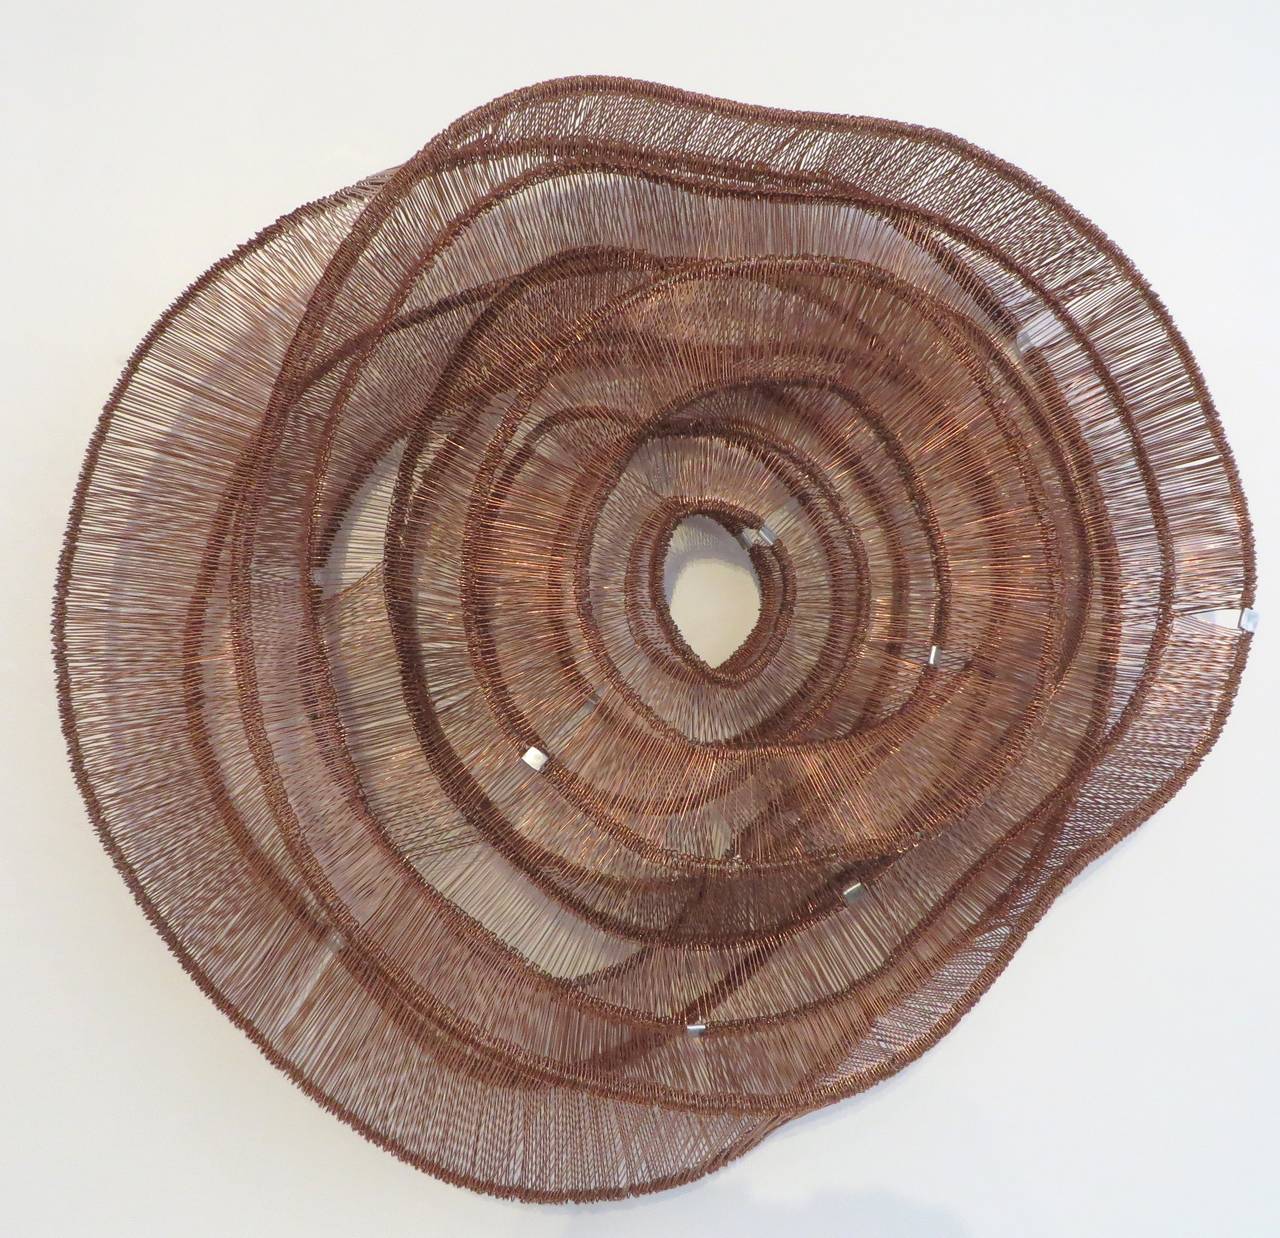 Contemporary Eric Gushee Emergence Series Large Copper Woven Sculpture, 2015